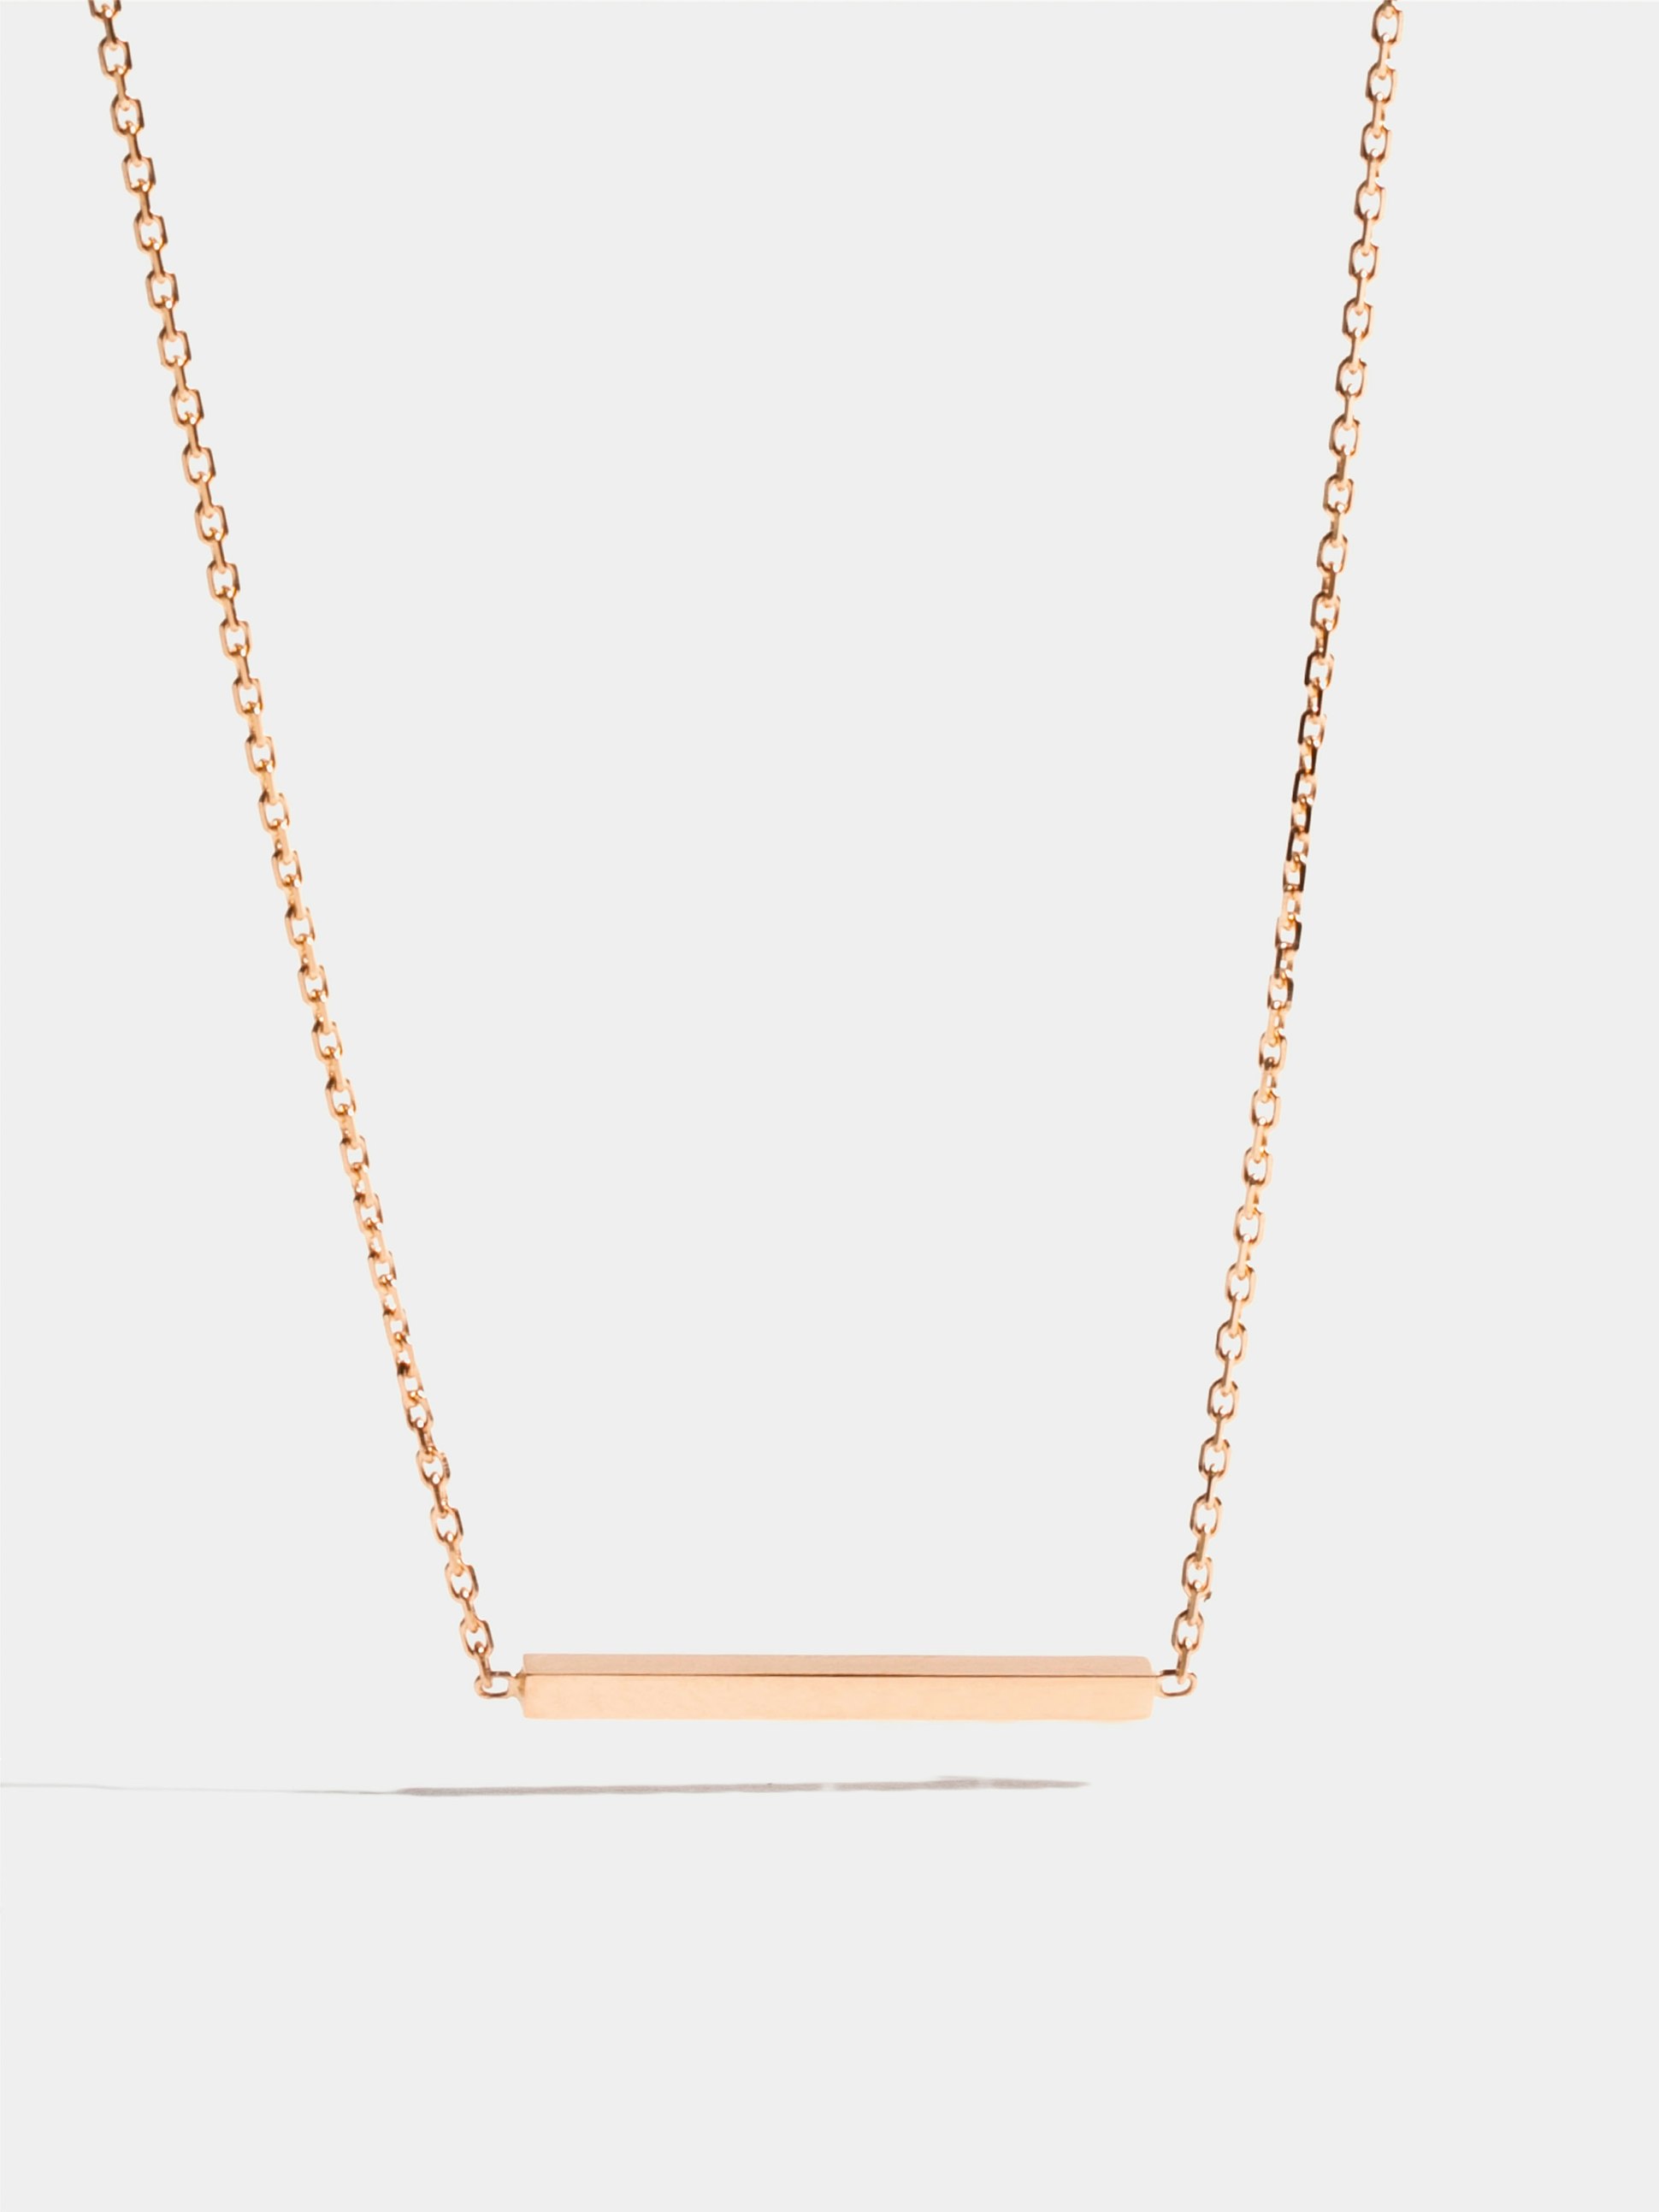 Anagramme polished motif in rose gold 18k Fairmined ethical, on 42 cm chain